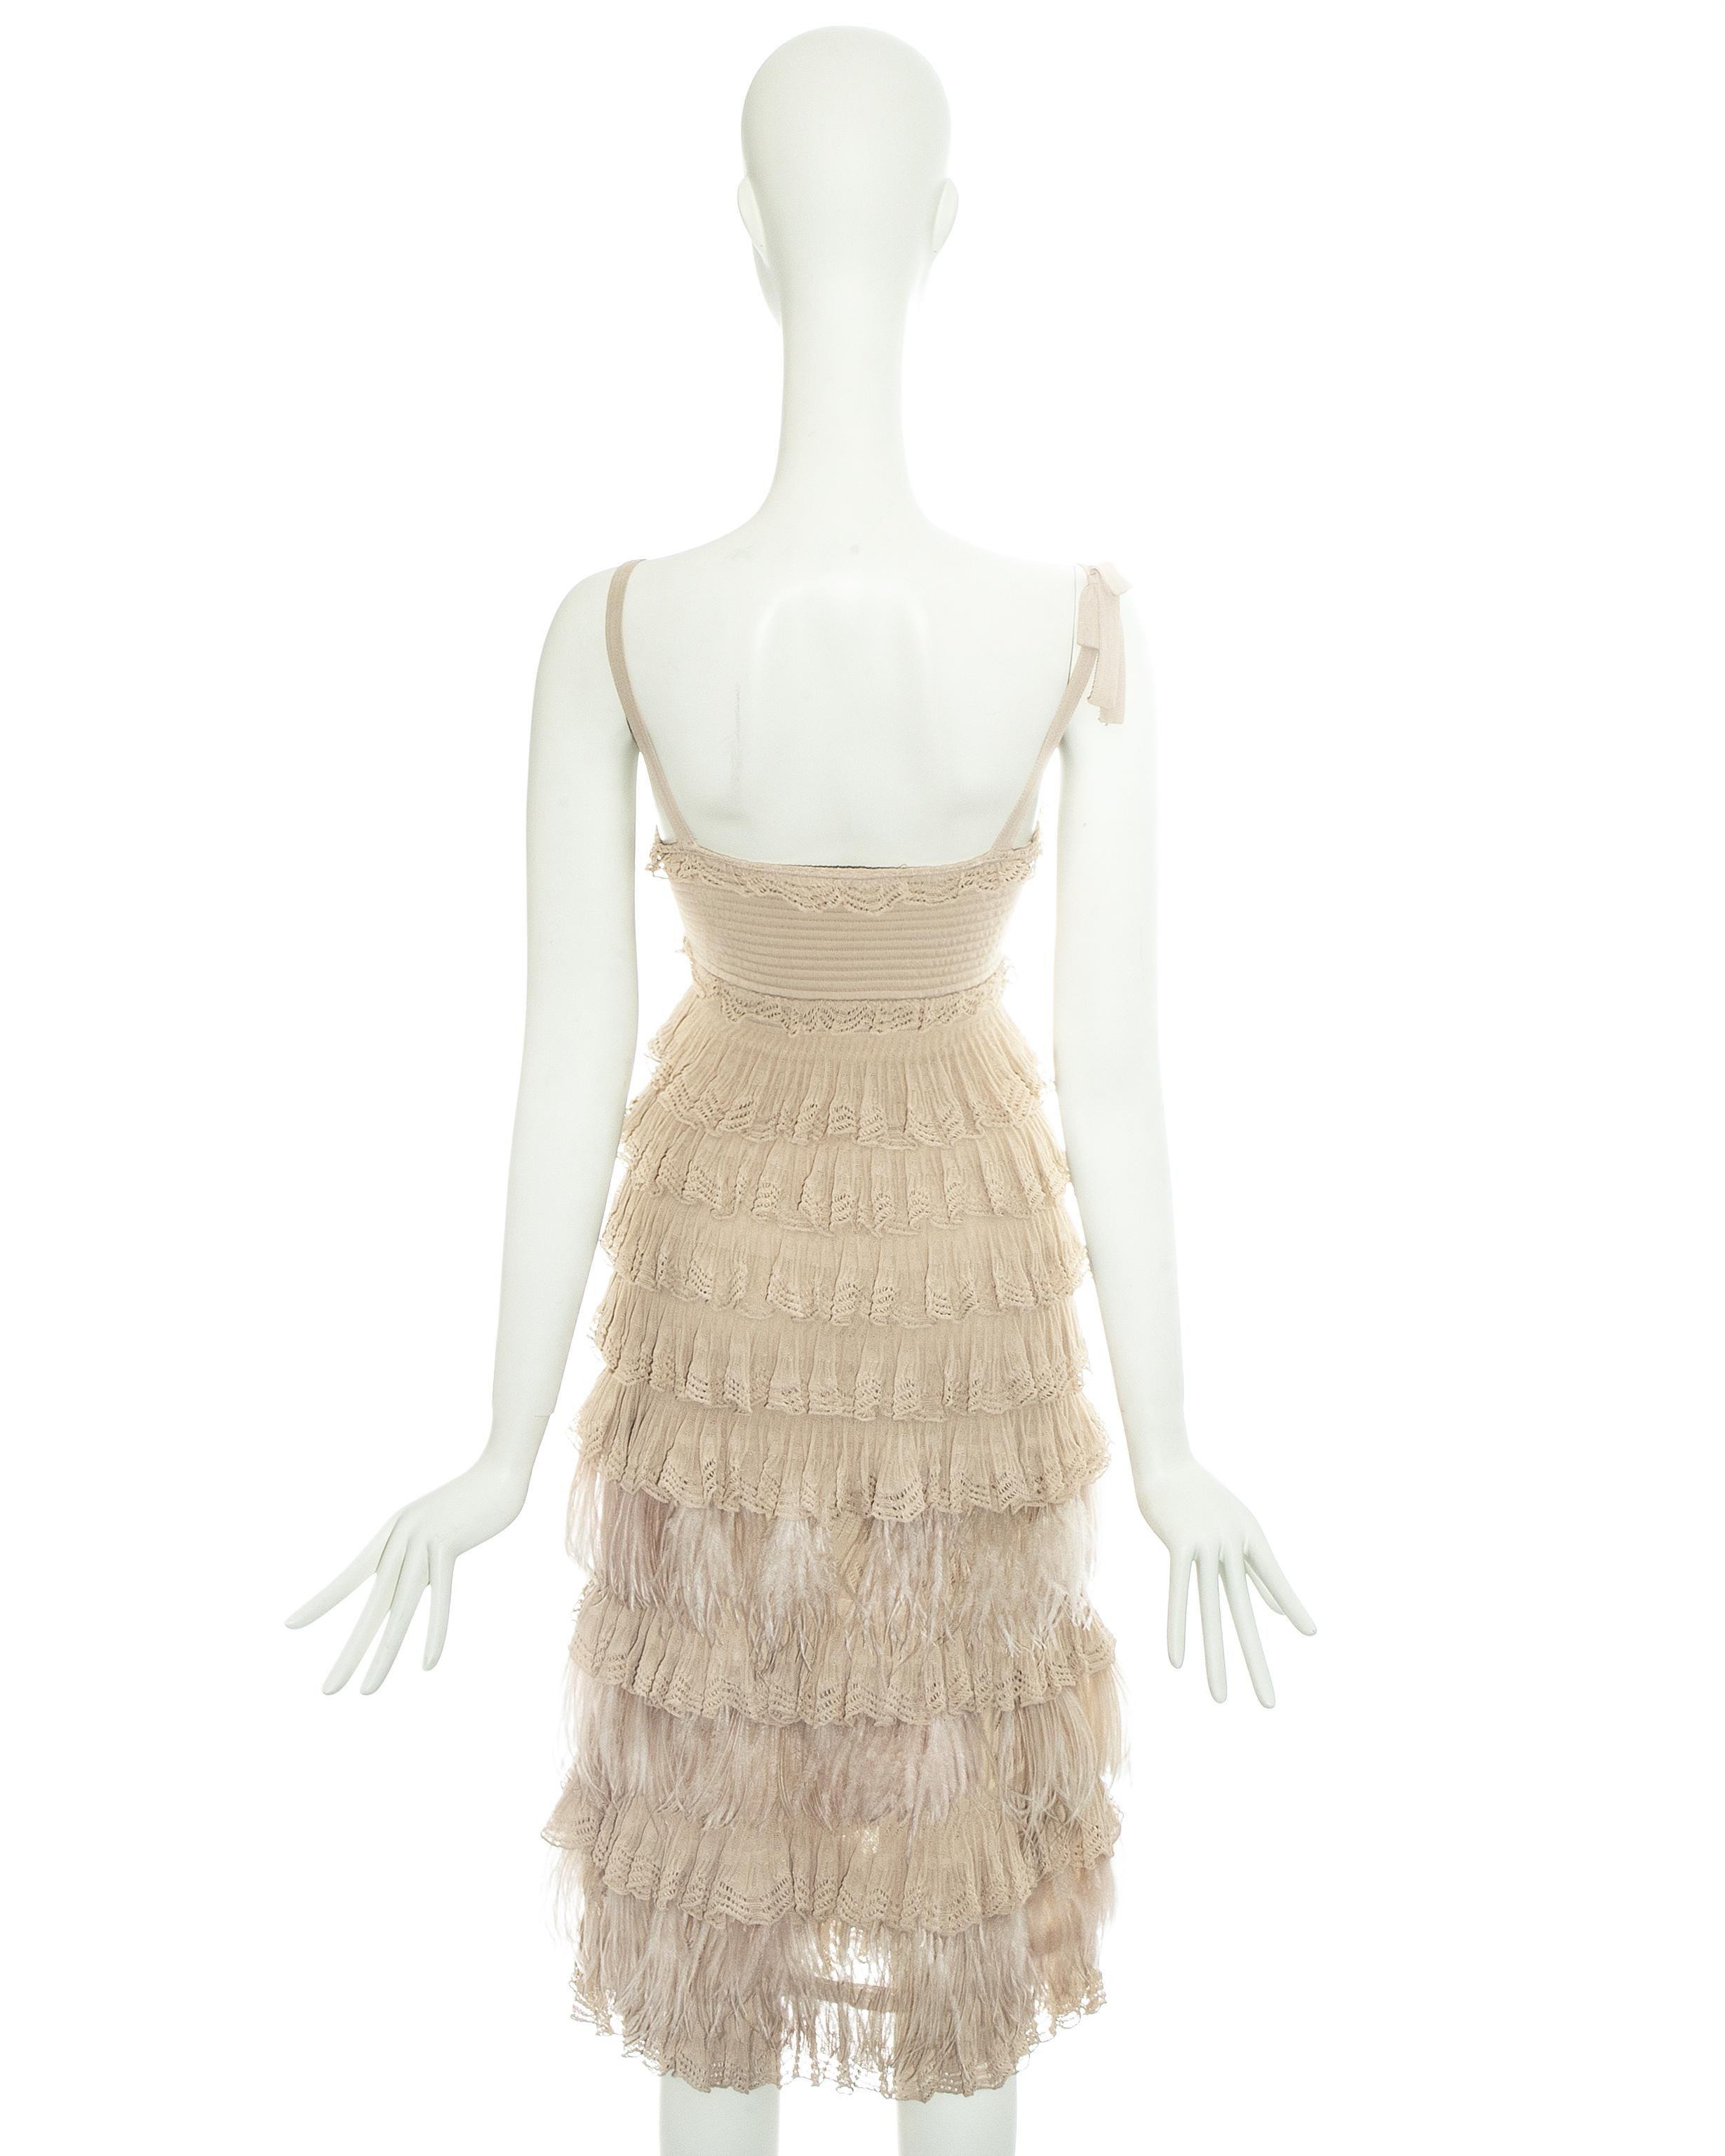 Beige Christian Dior beige knitted ruffled dress with ostrich feathers, fw 2011